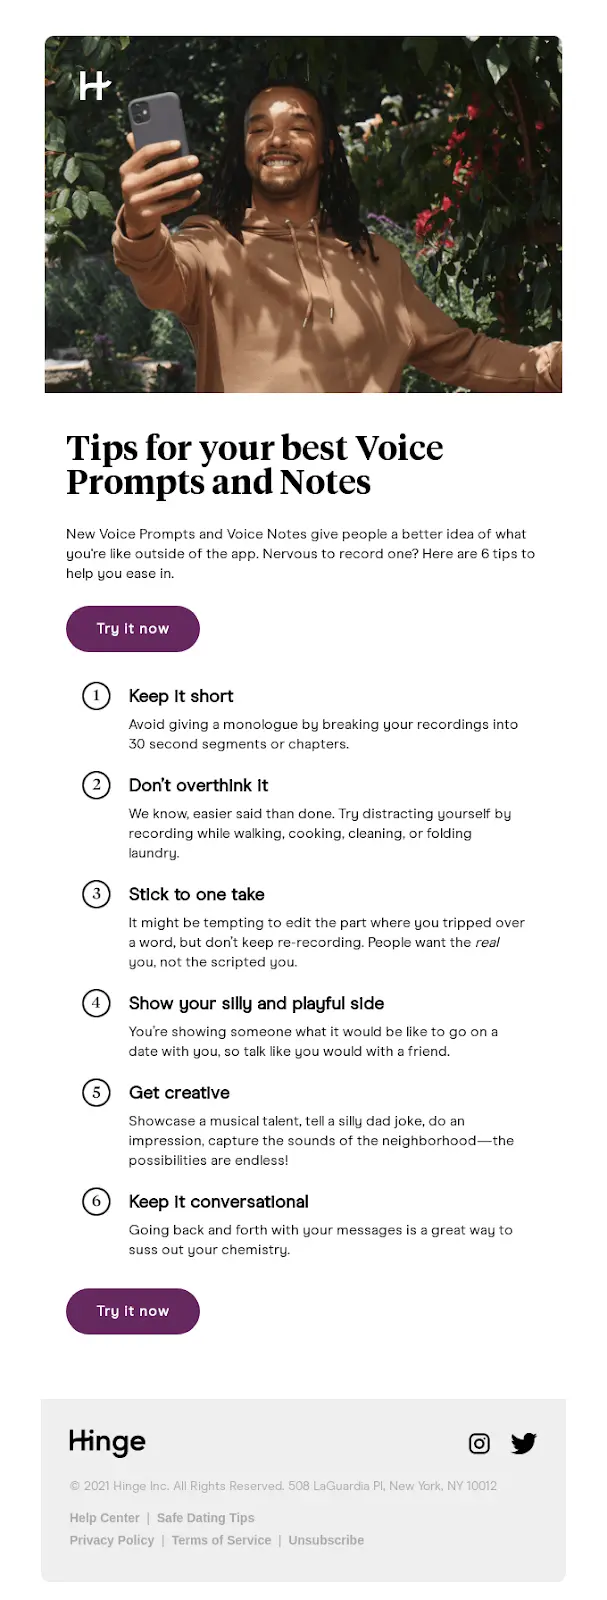 Email newsletter with tips for voice prompts